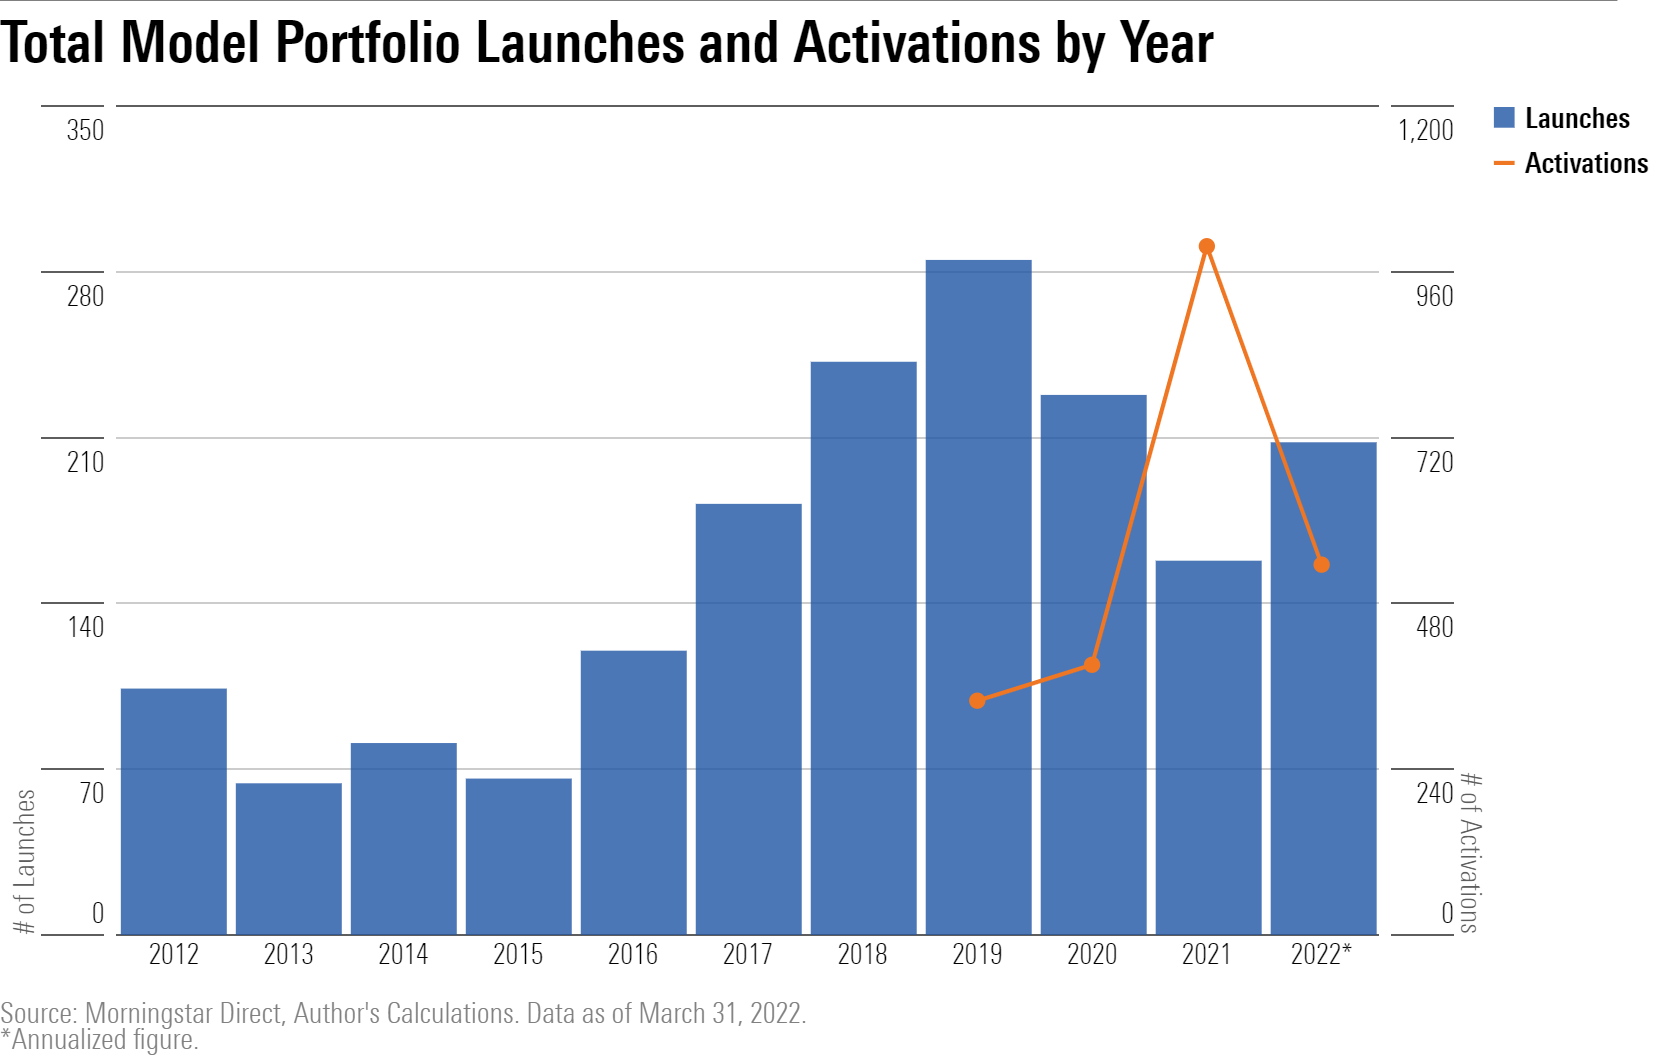 A bar chart of model portfolio launches and activations by year from 2012 to March 31, 2022.